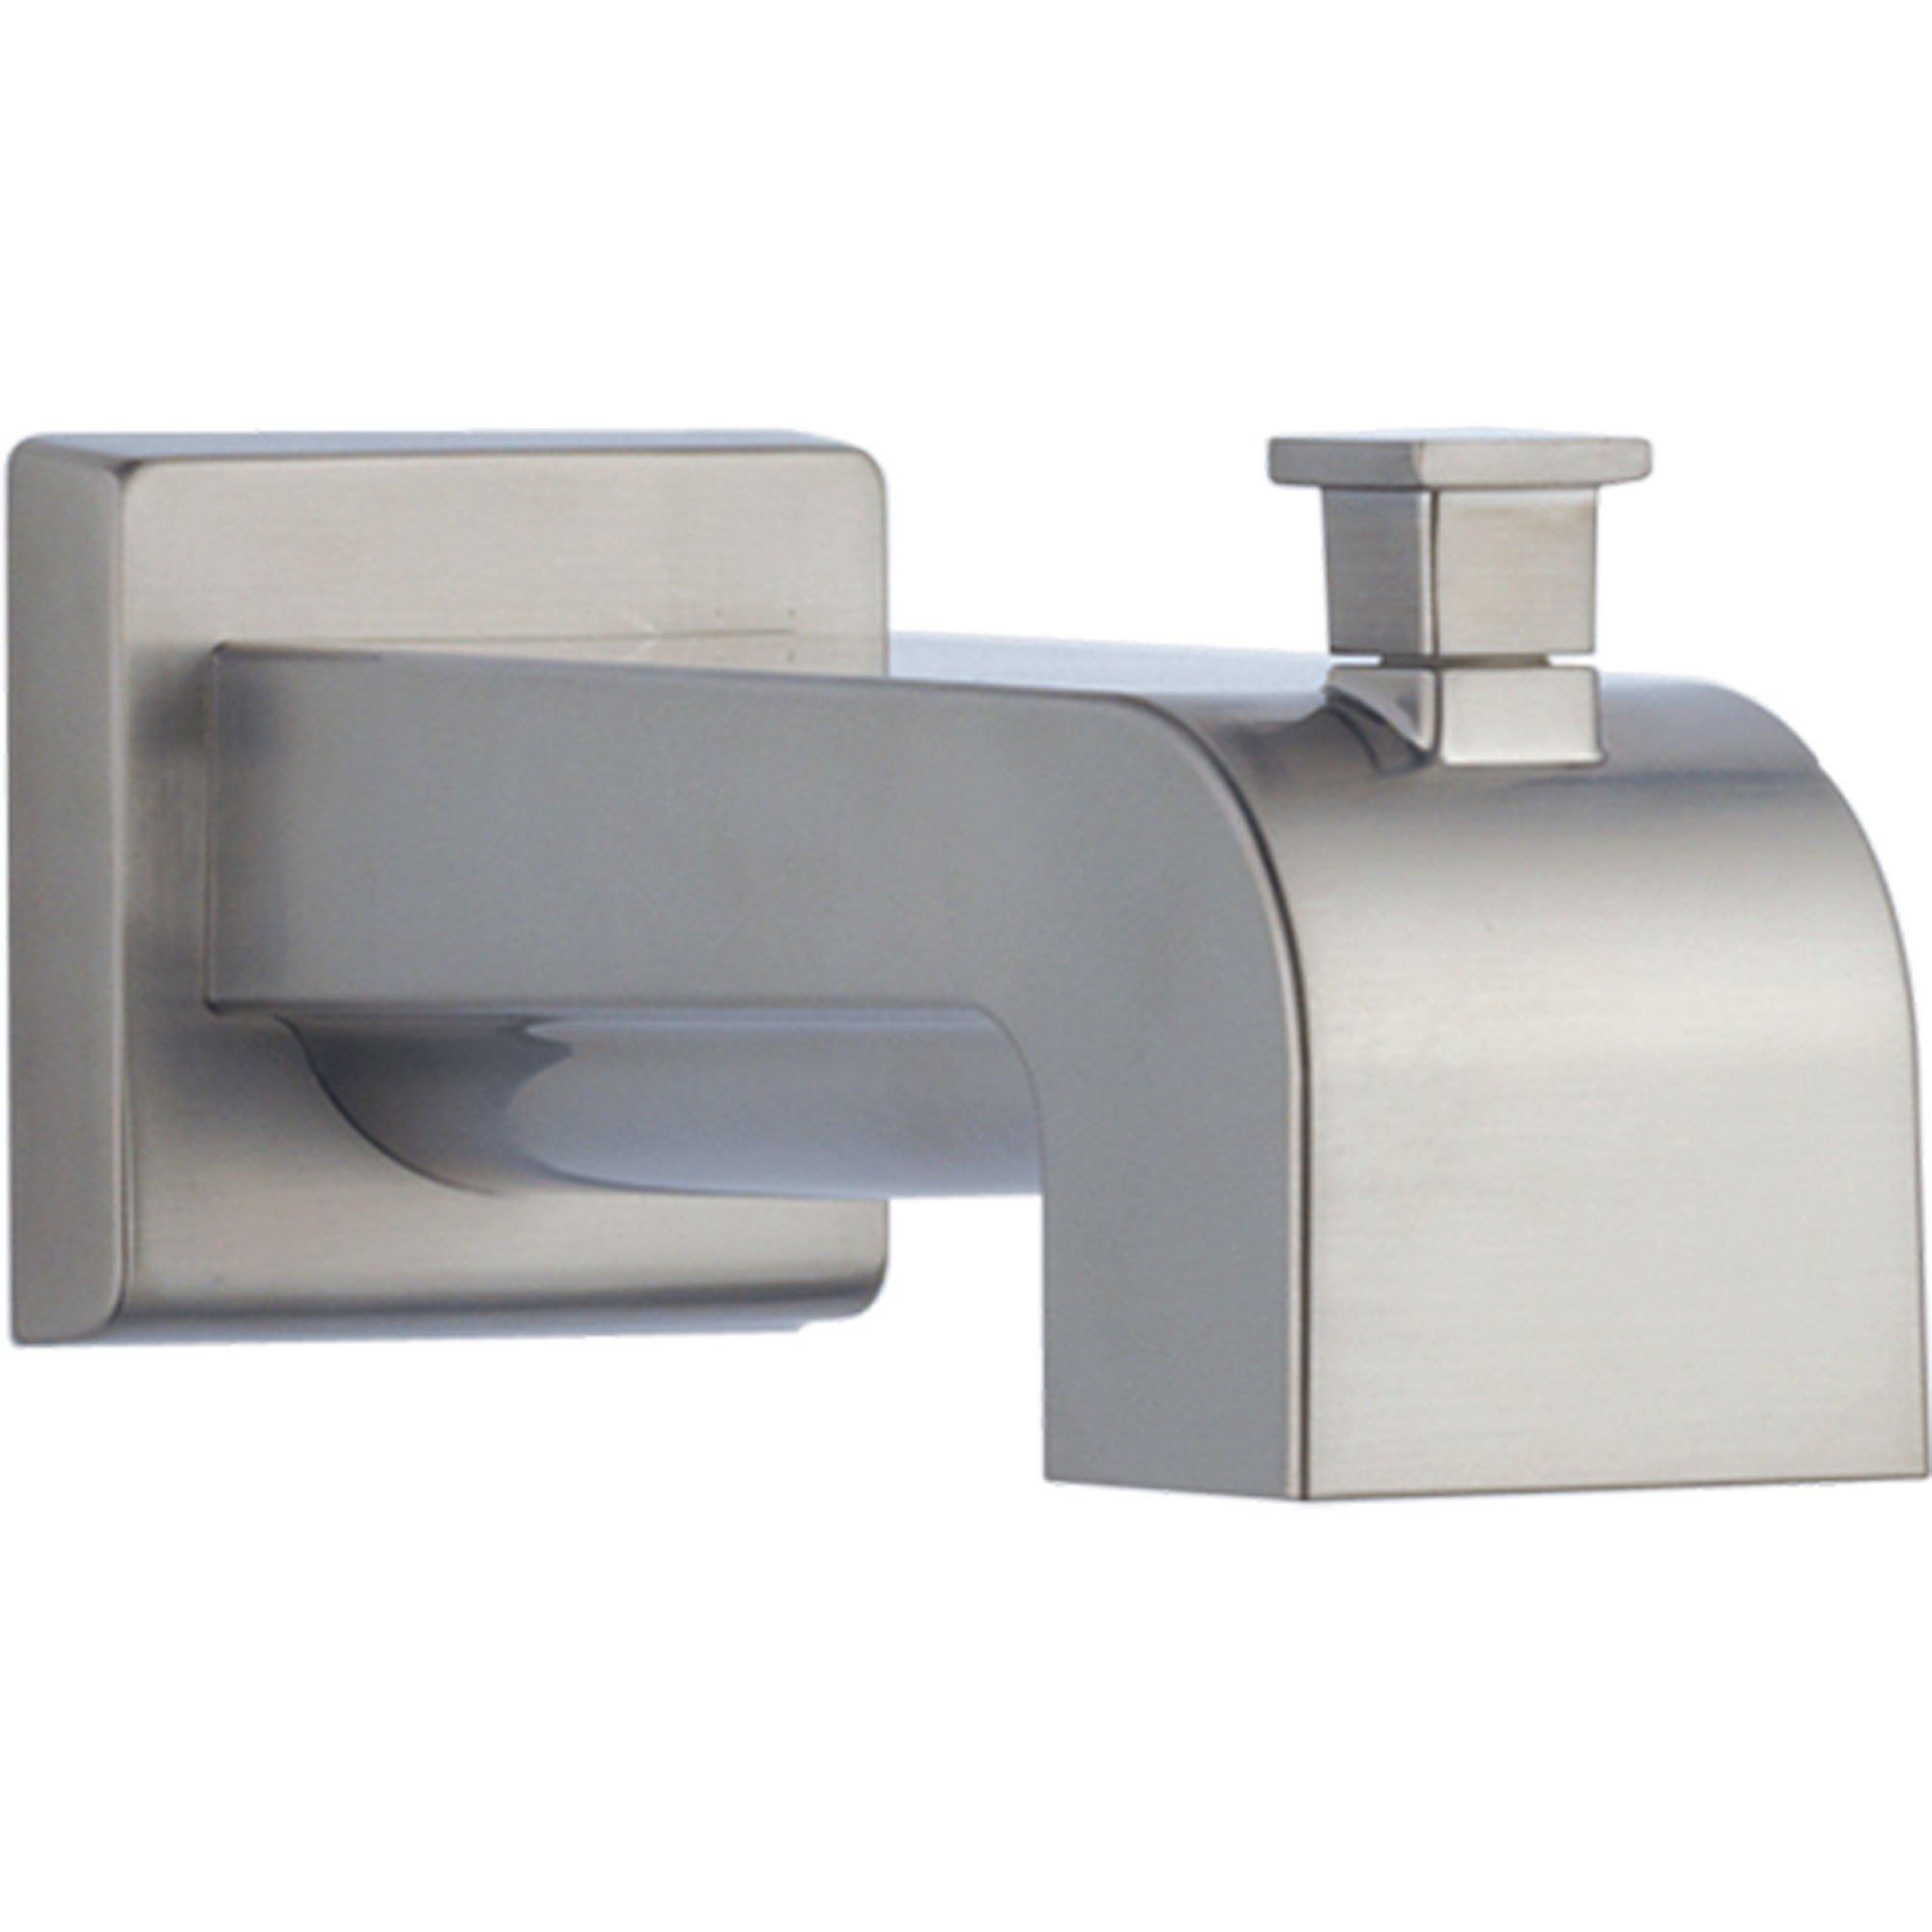 Delta Arzo 7.13" Modern Stainless Steel Finish Pull-Up Diverter Tub Spout 588659